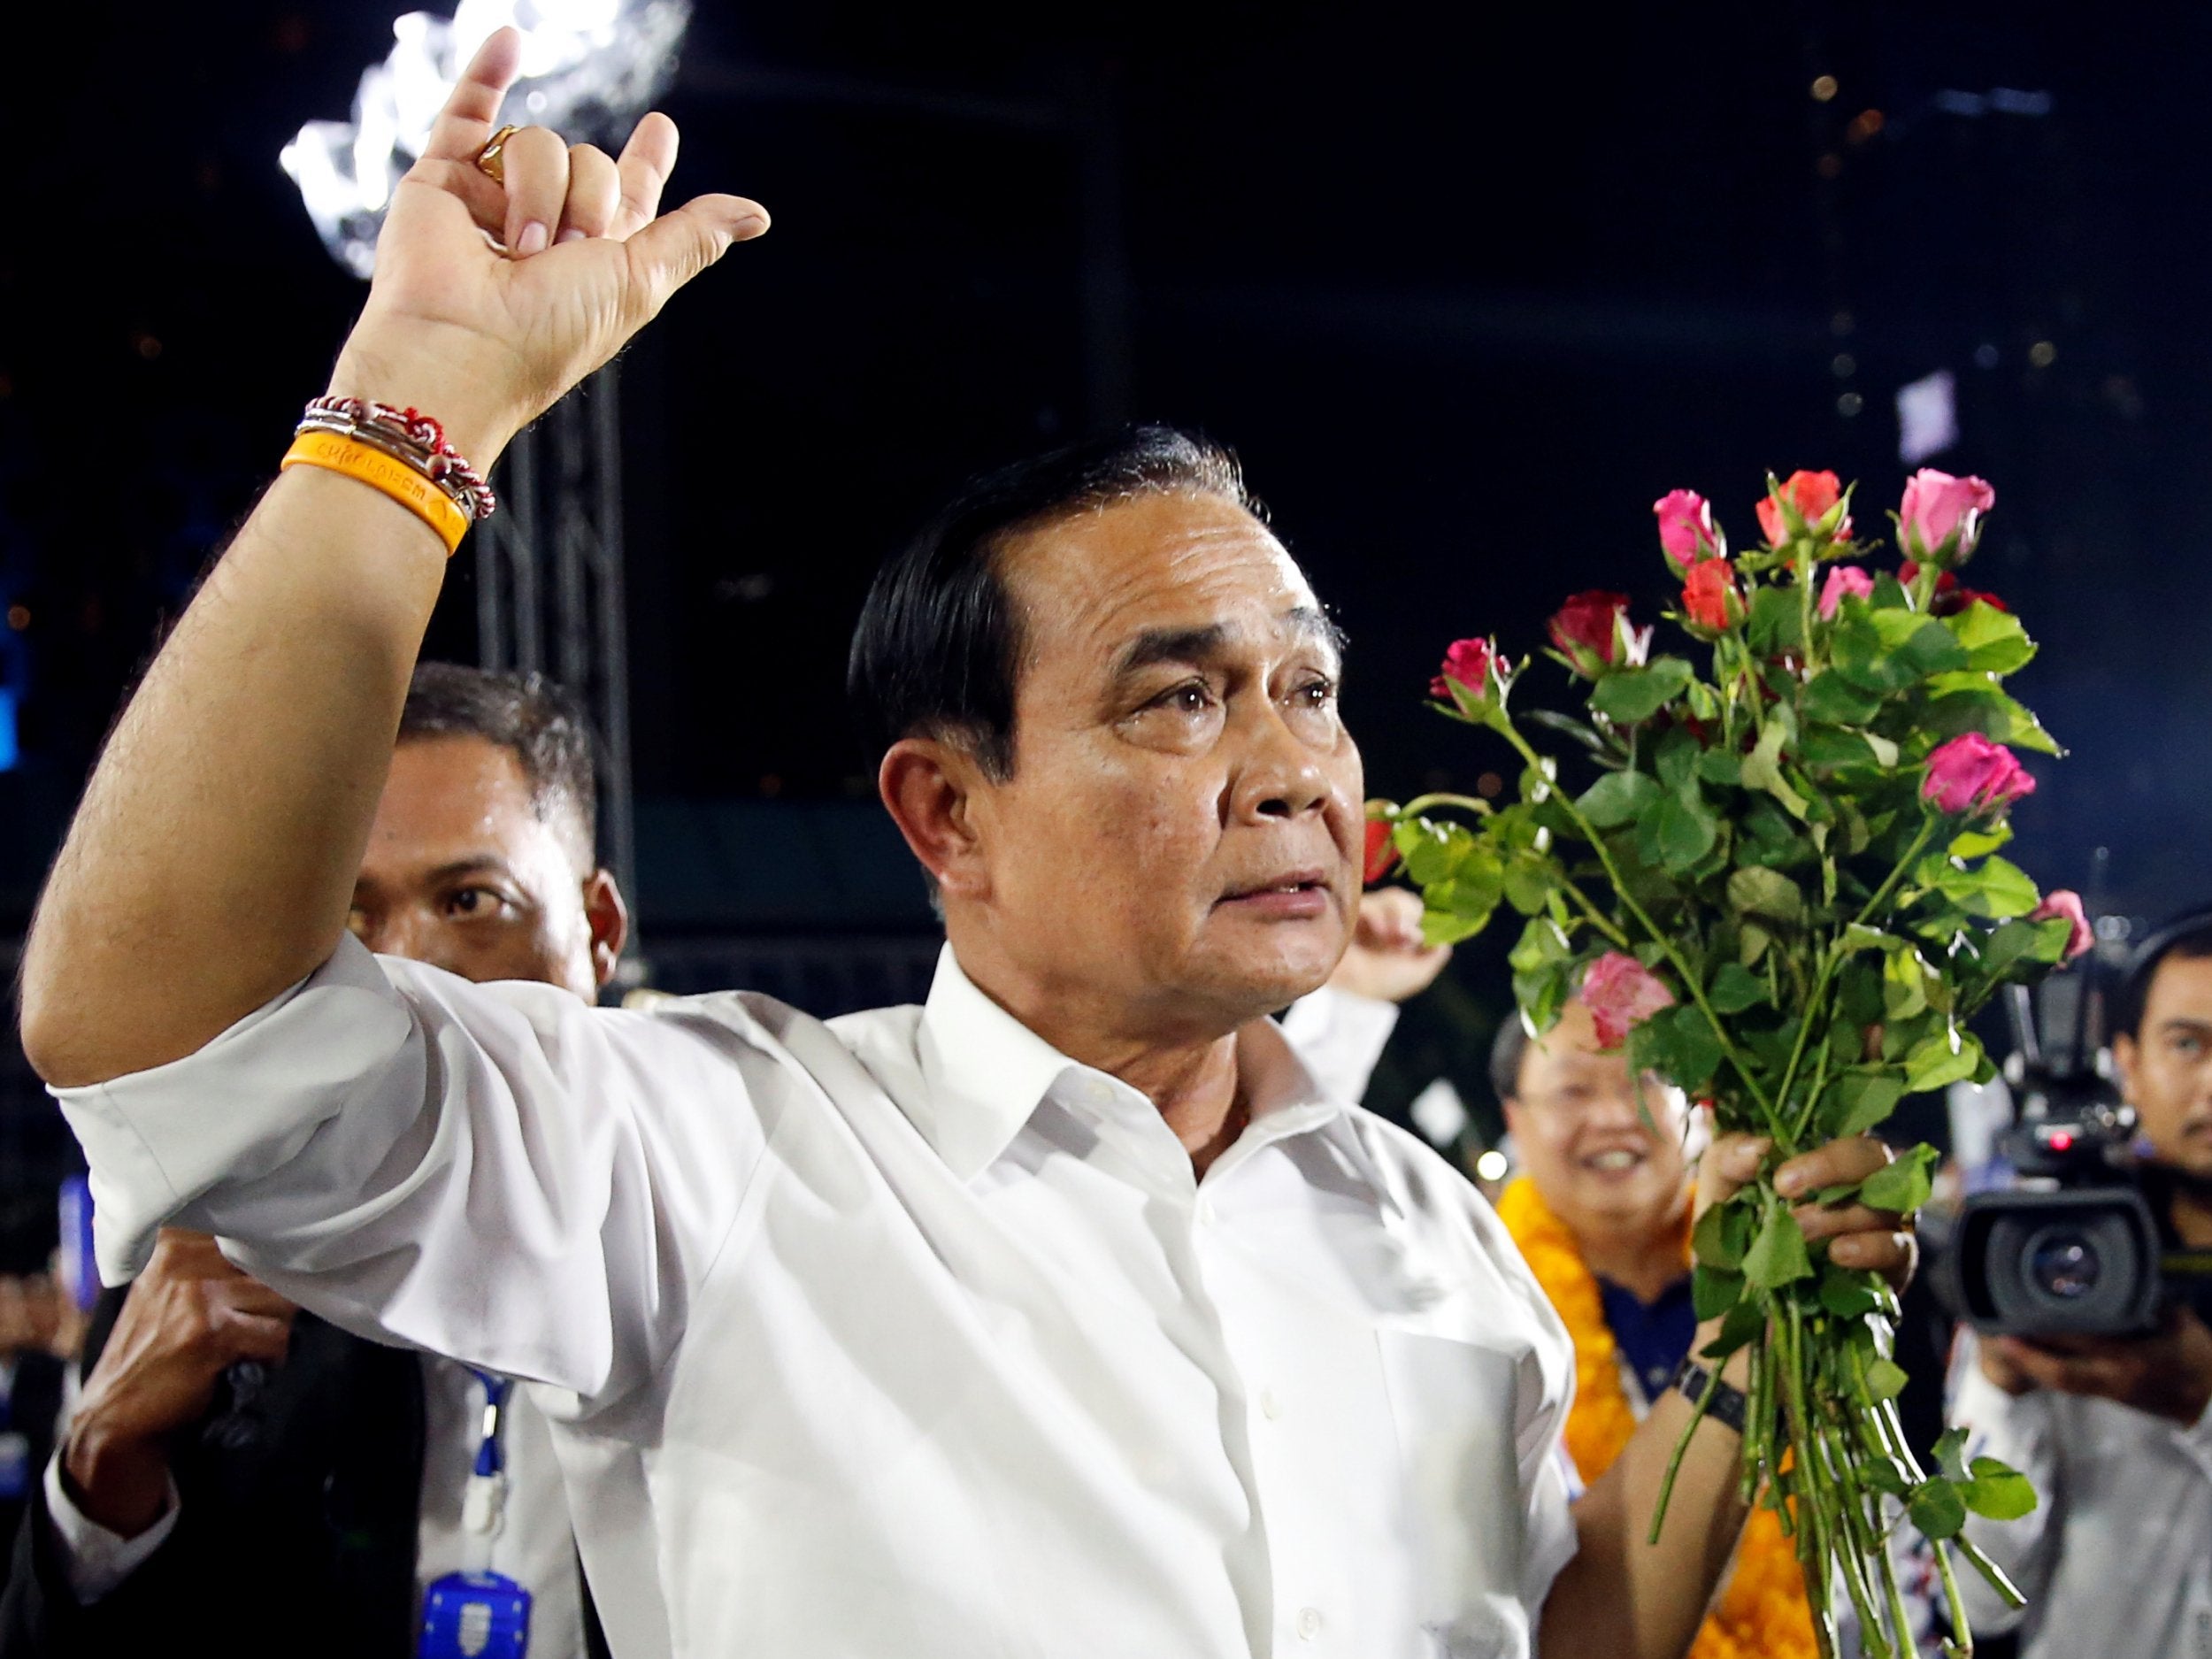 Thailand's prime minister and 2014 coup leader Prayuth Chan-ocha attends the Palang Pracharat party's final major rally in central Bangkok